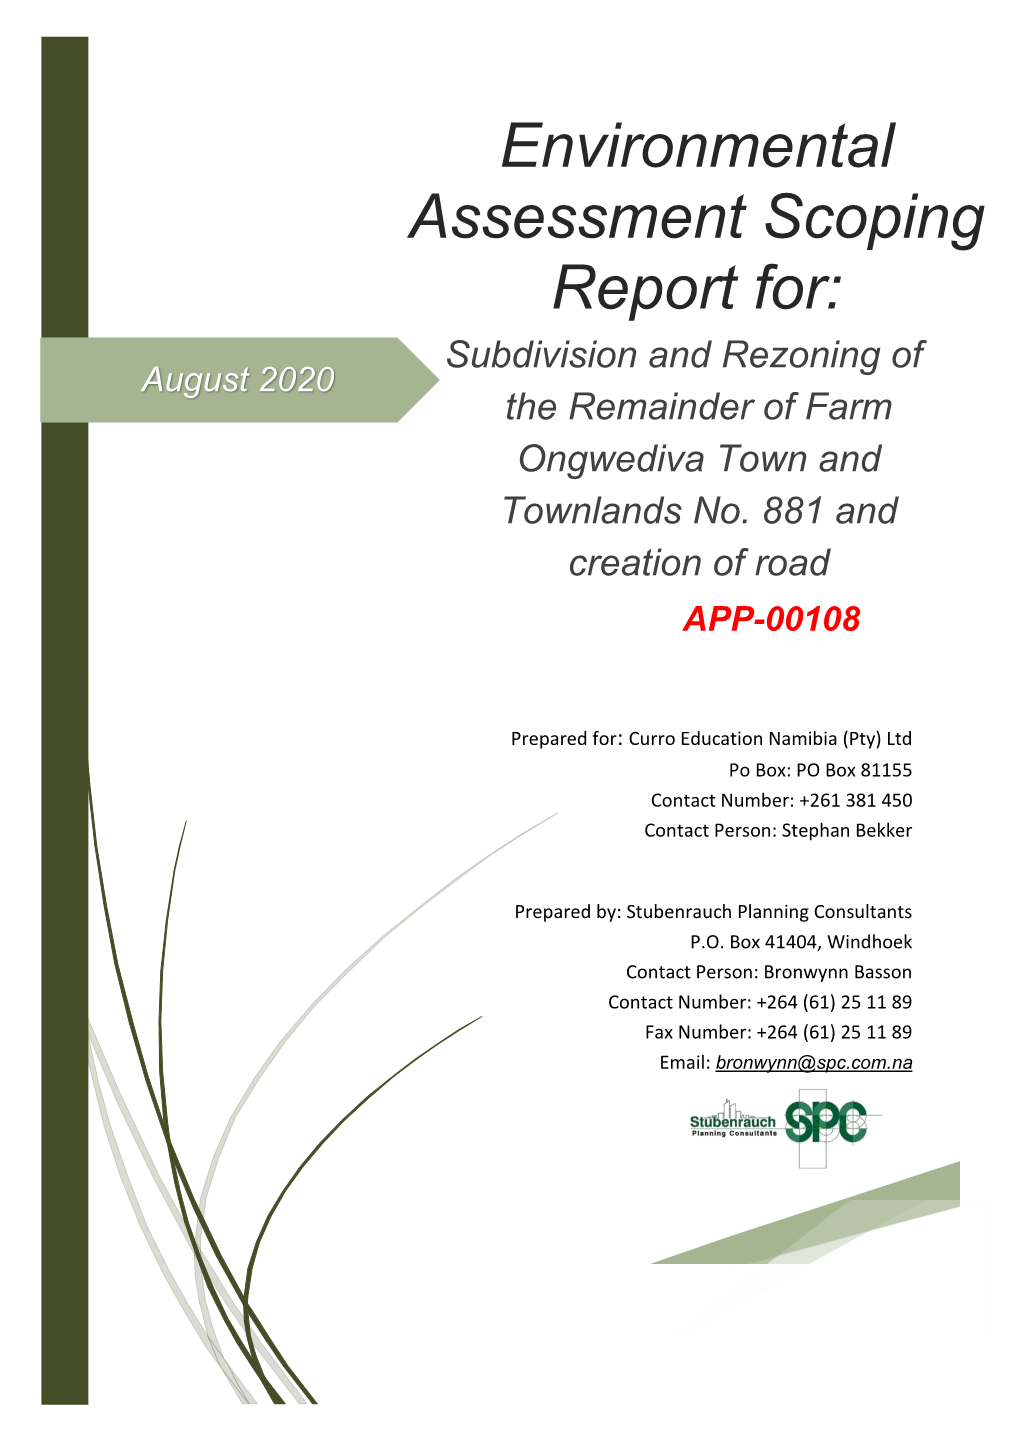 Environmental Assessment Scoping Report For: Subdivision and Rezoning of August 2020 the Remainder of Farm Ongwediva Town and Townlands No